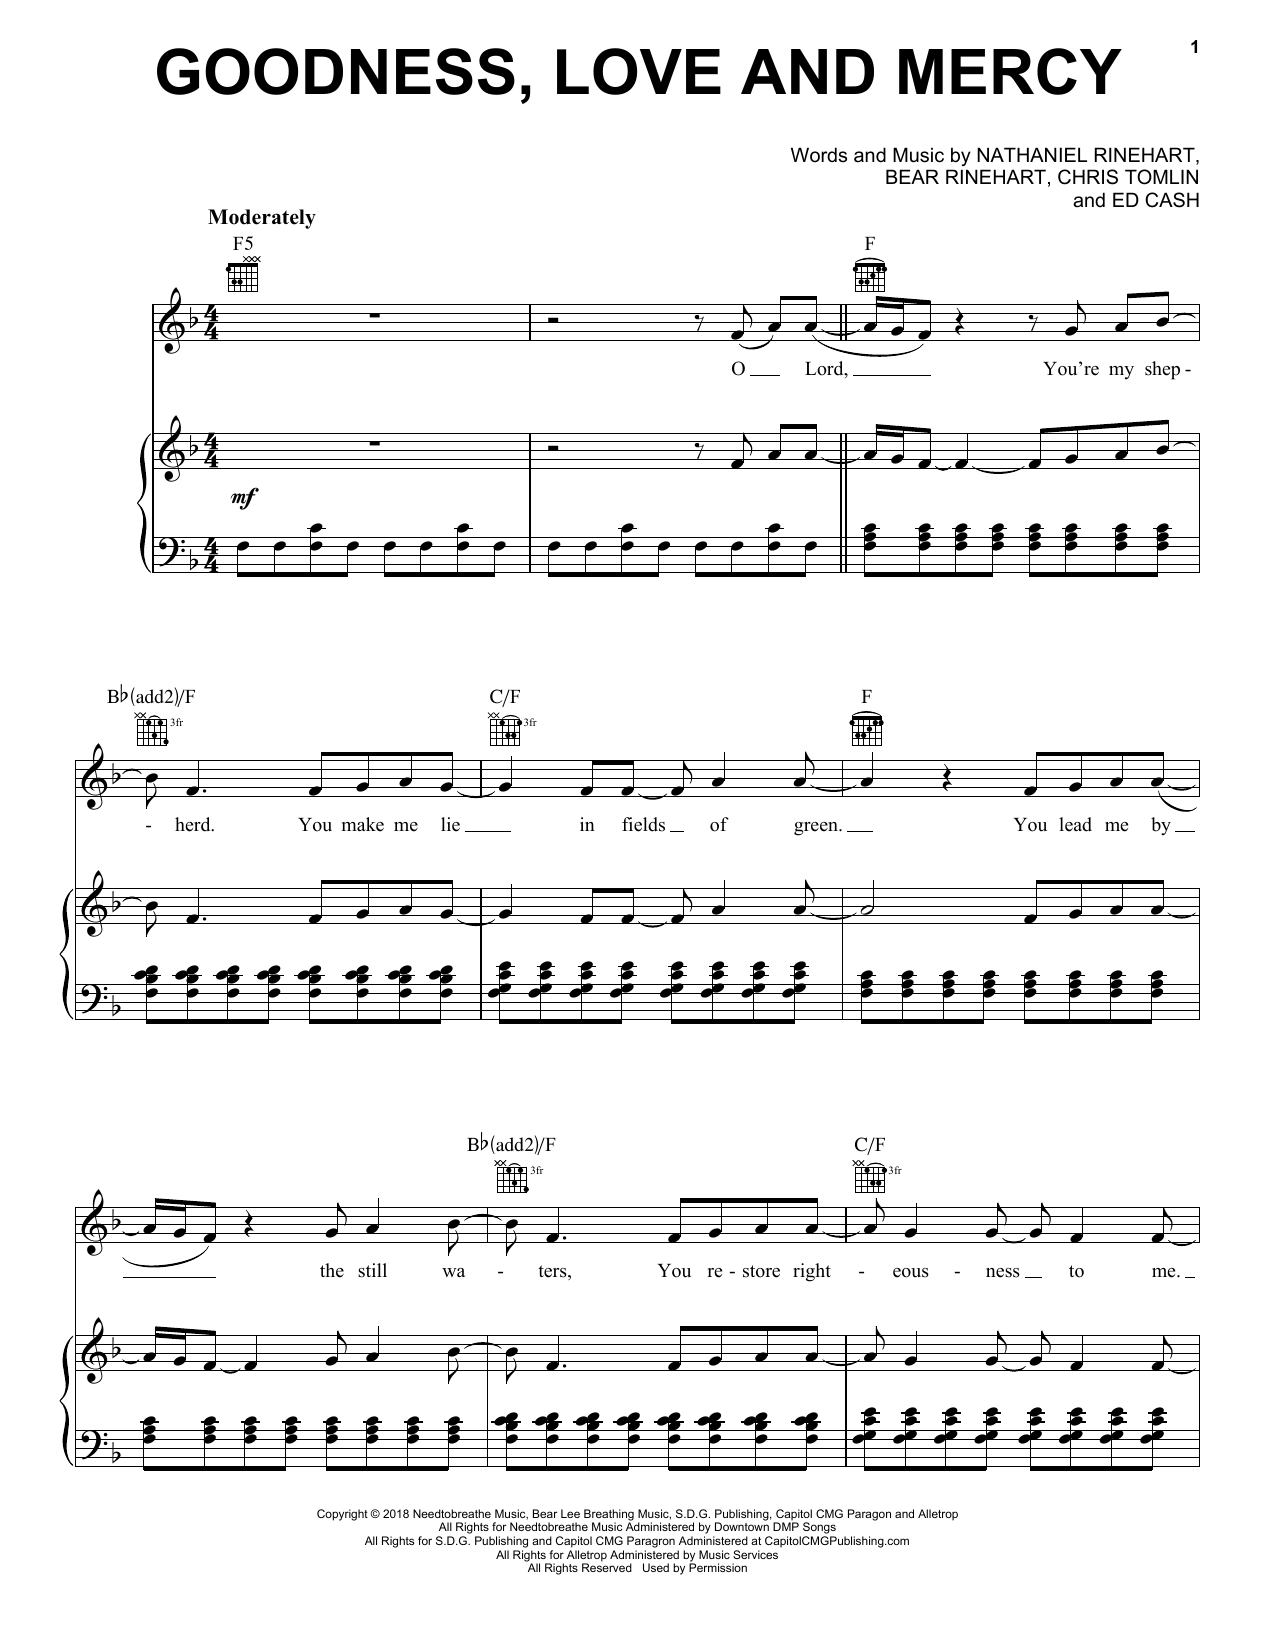 Chris Tomlin Goodness, Love And Mercy sheet music notes and chords. Download Printable PDF.